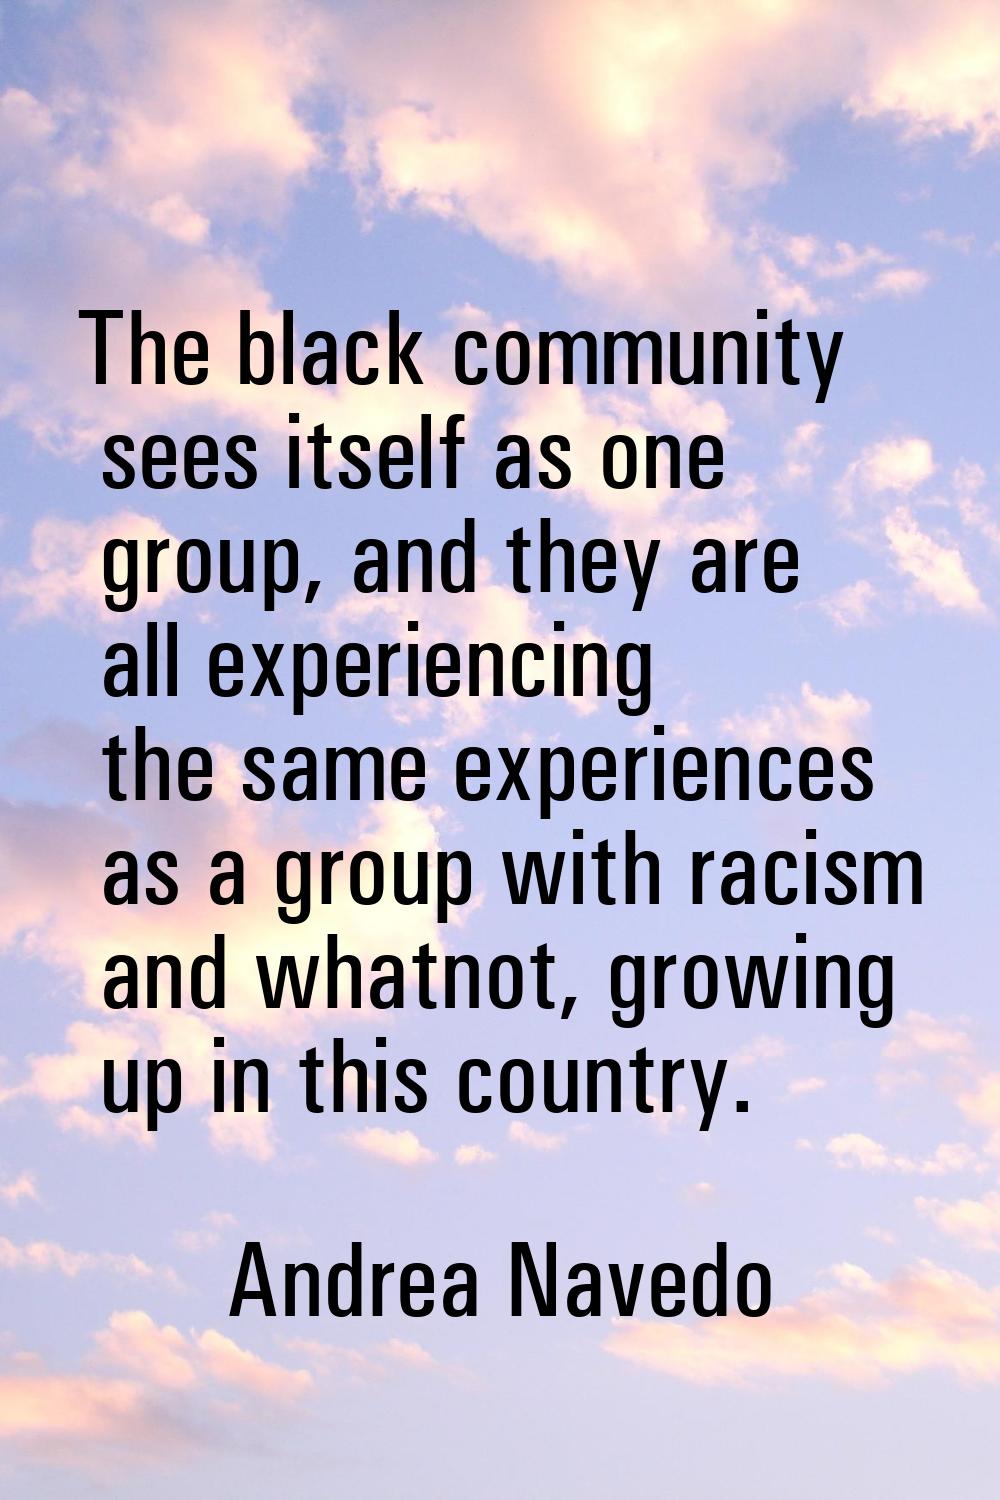 The black community sees itself as one group, and they are all experiencing the same experiences as